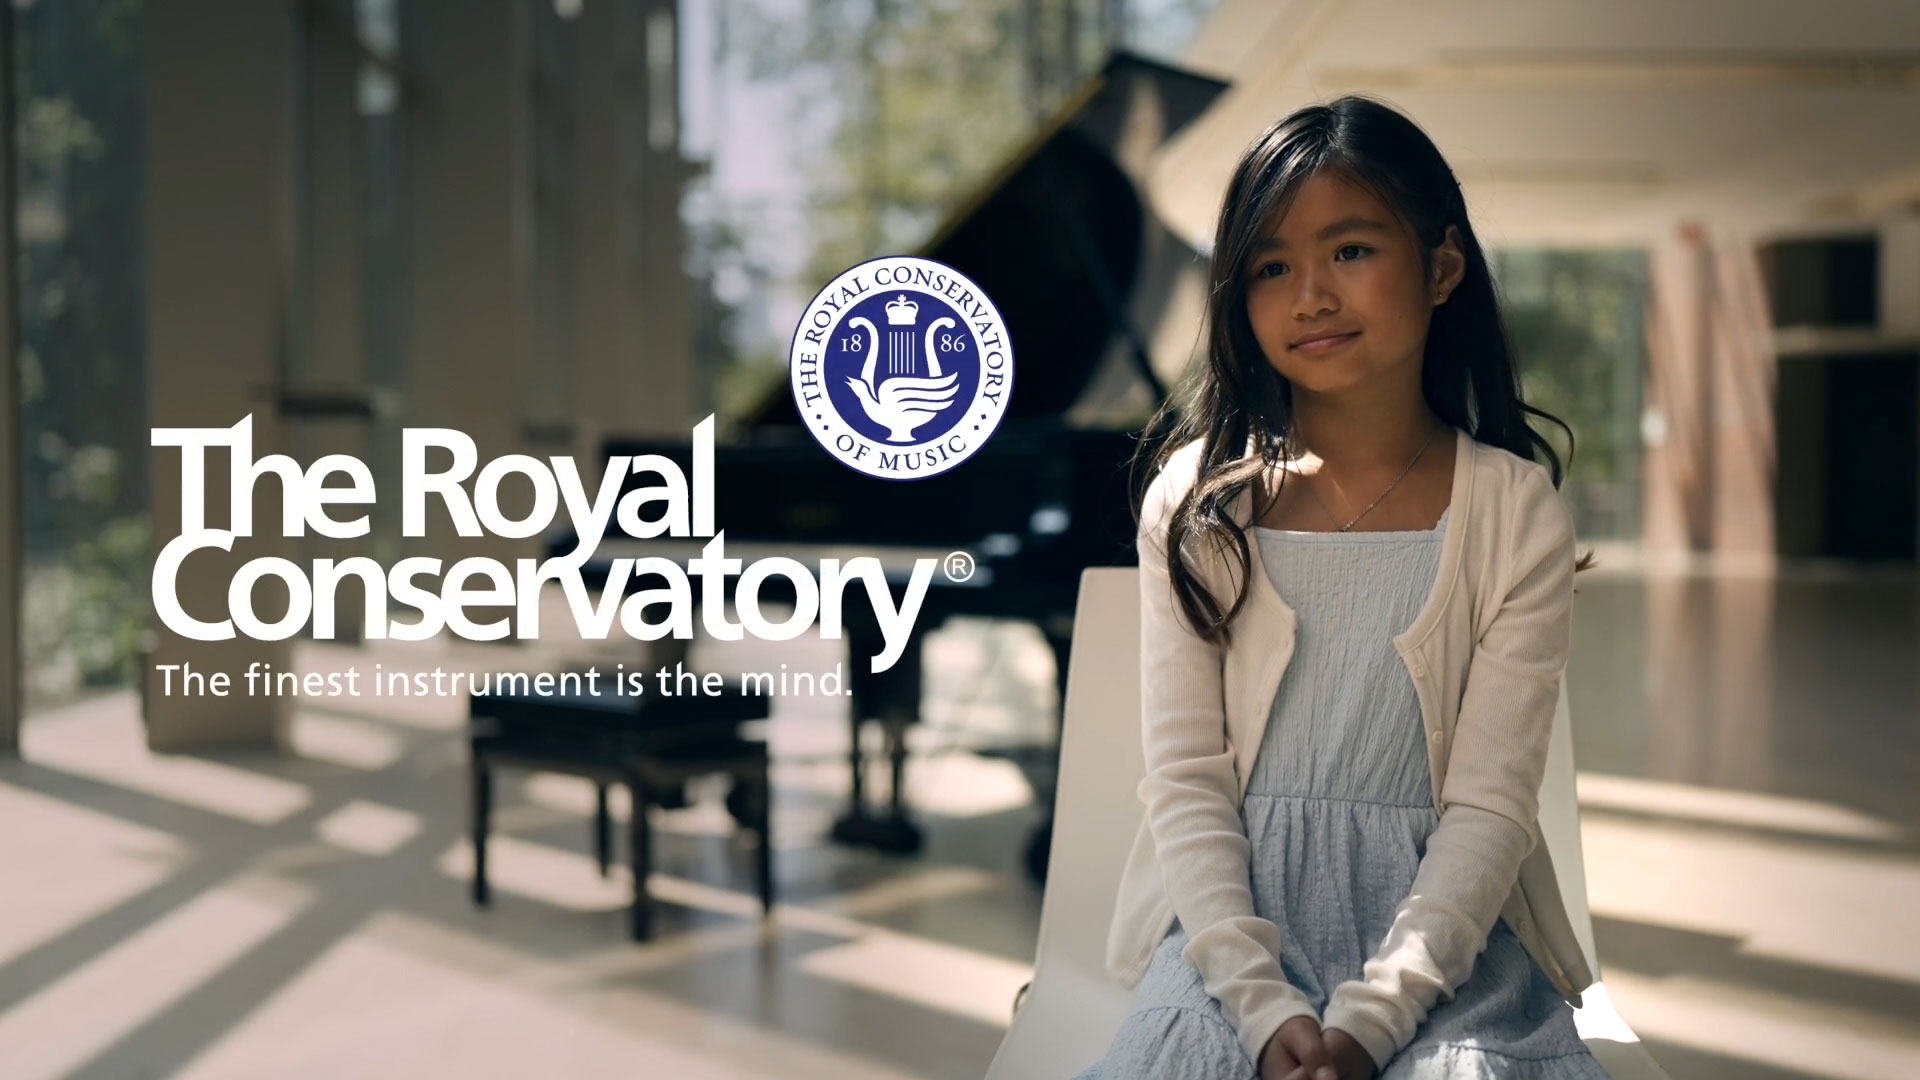 The Royal Conservatory of Music encourages parents to enroll children in music lessons to help create a path to develop life-long skills and achieve academic success.